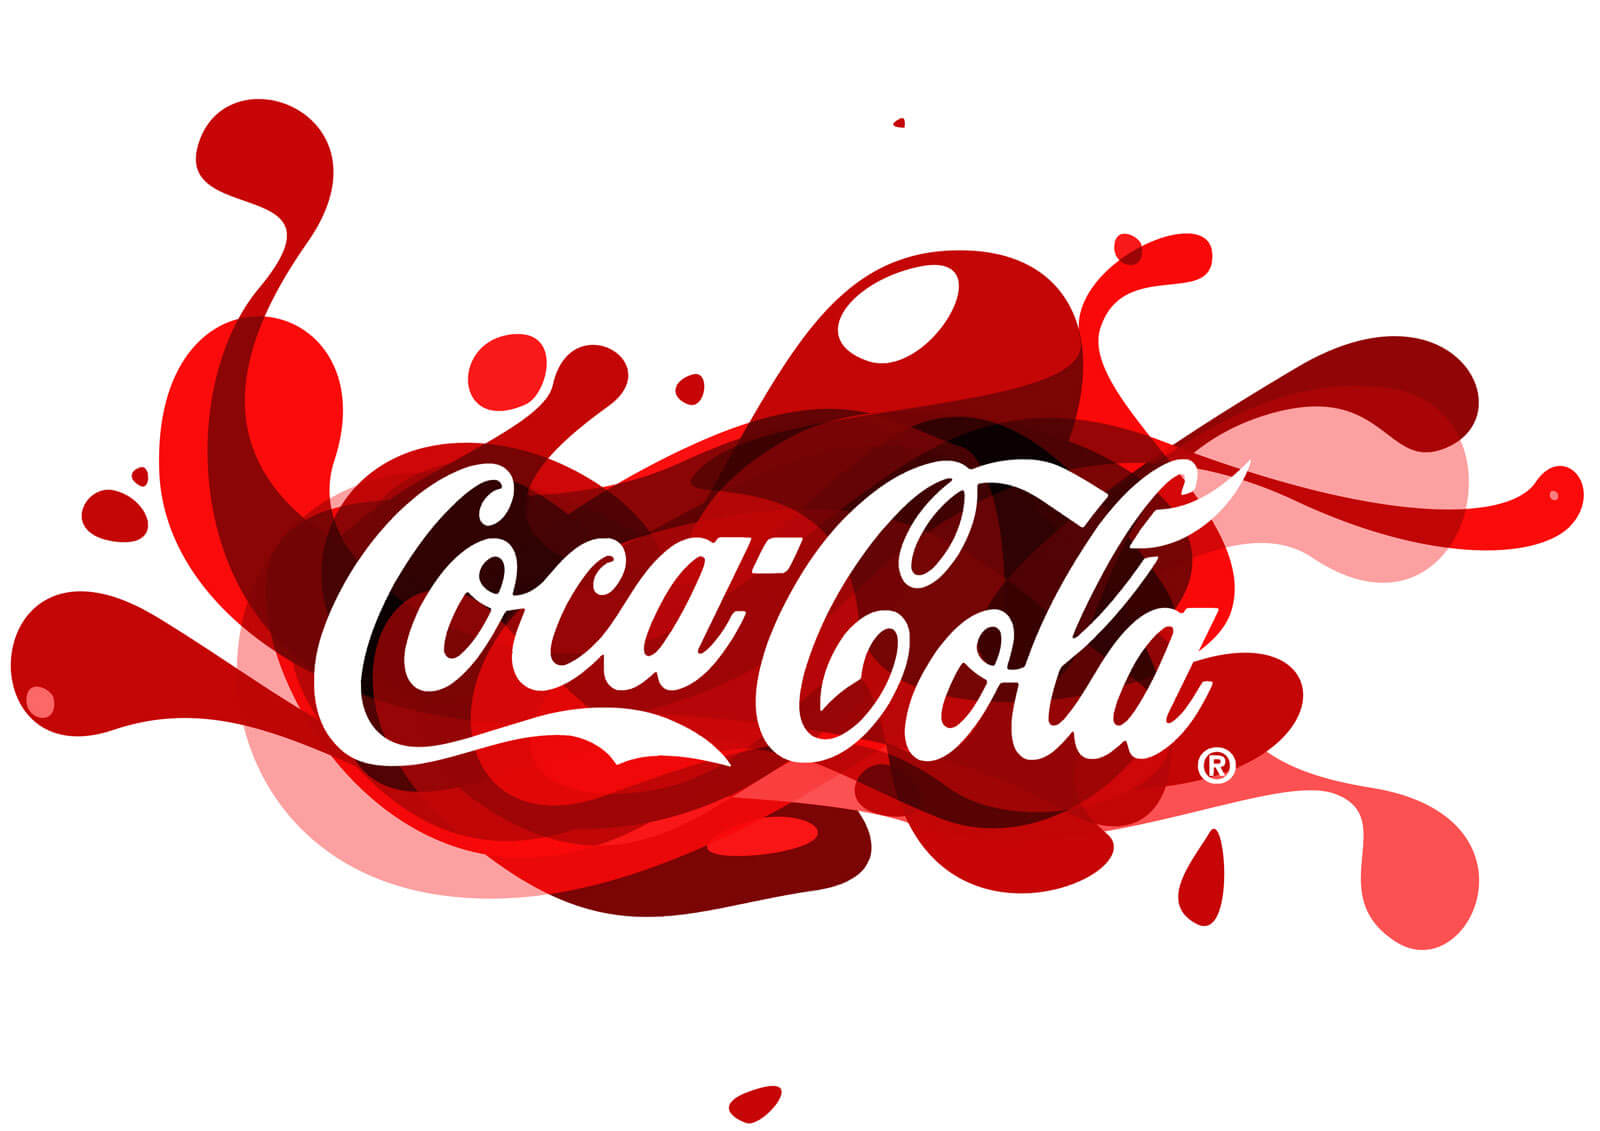 Coca Cola Free Ppt Backgrounds For Your Powerpoint Templates In Coca Cola Powerpoint Template